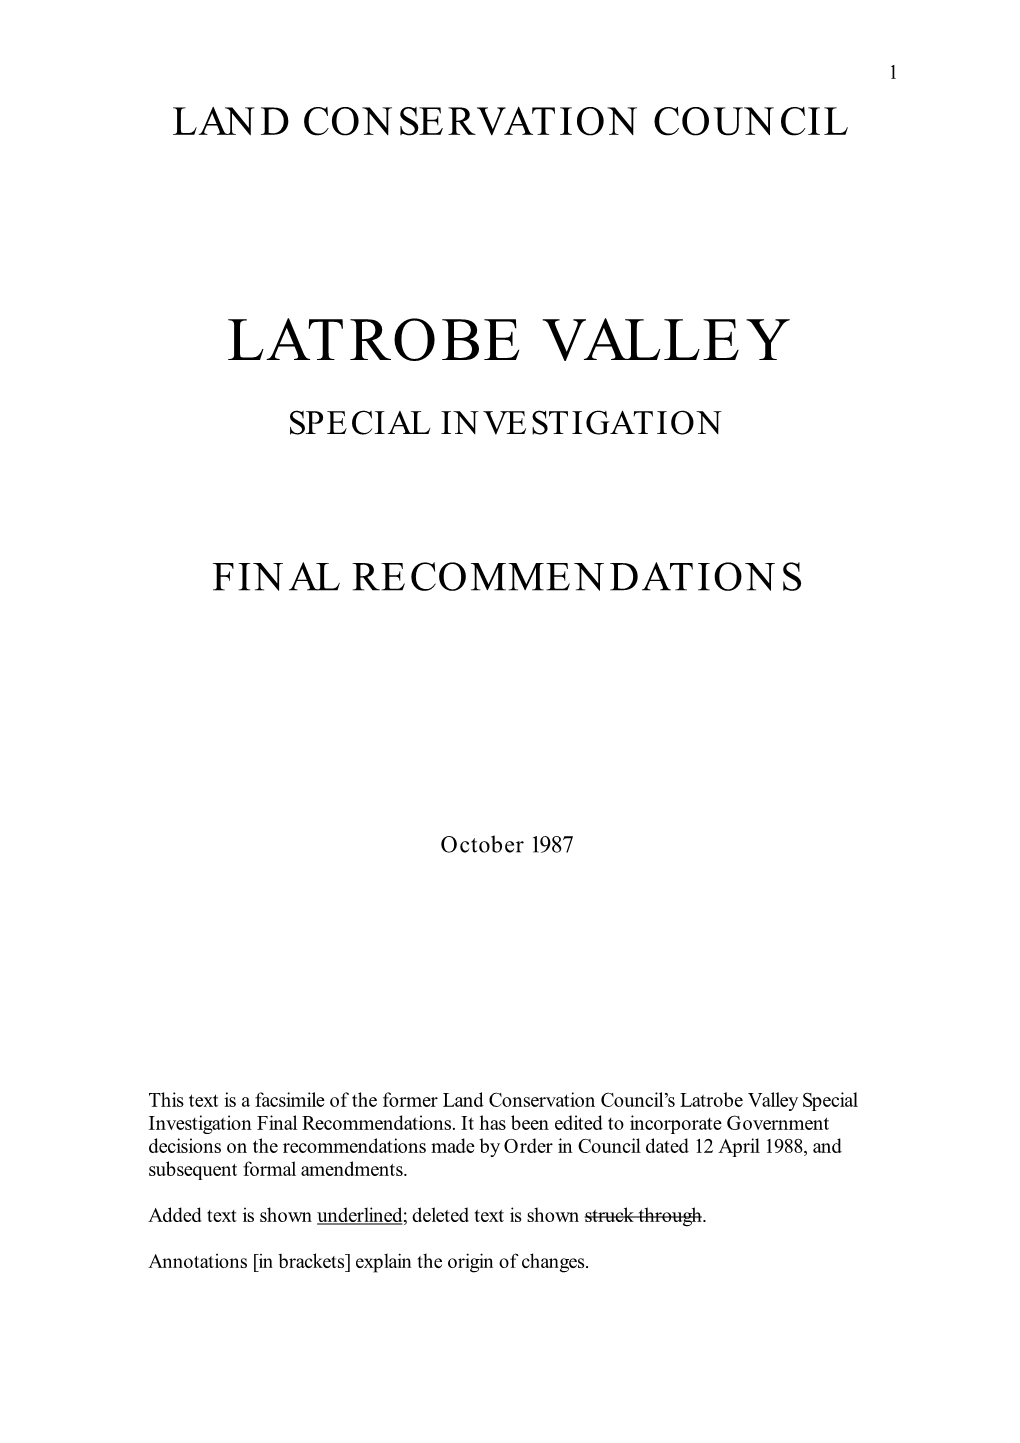 Latrobe Valley Special Investigation Final Recommendations